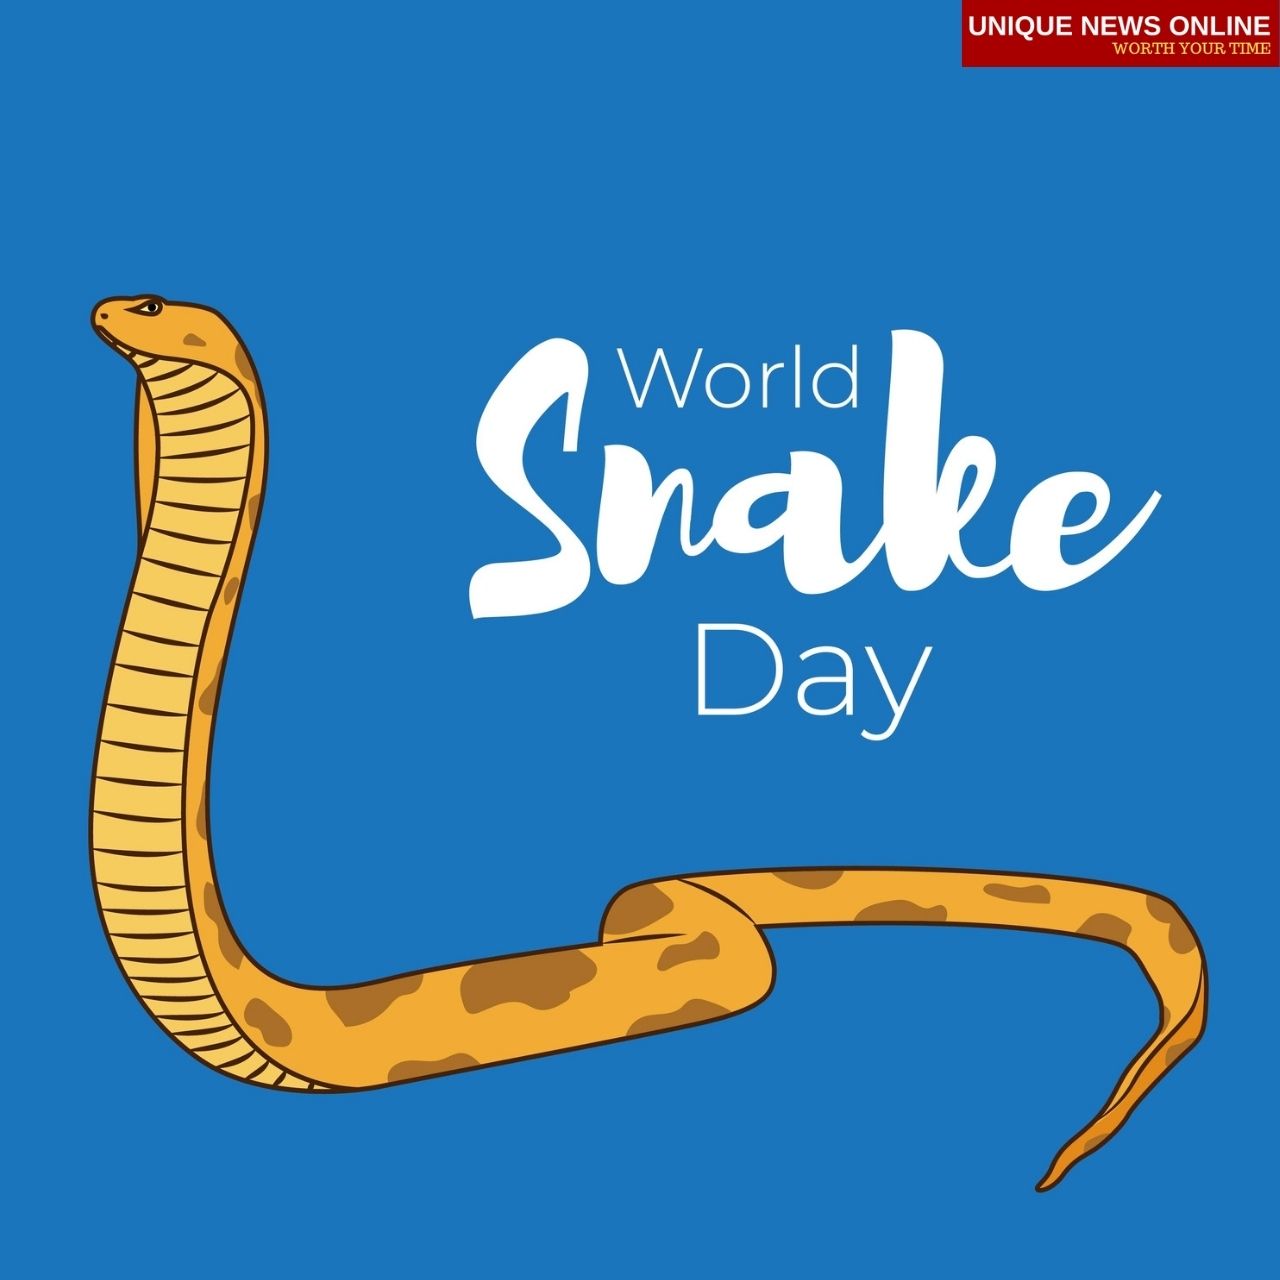 World Snake Day 2021 Quotes, Images, Slogan, Meme, Messages, and